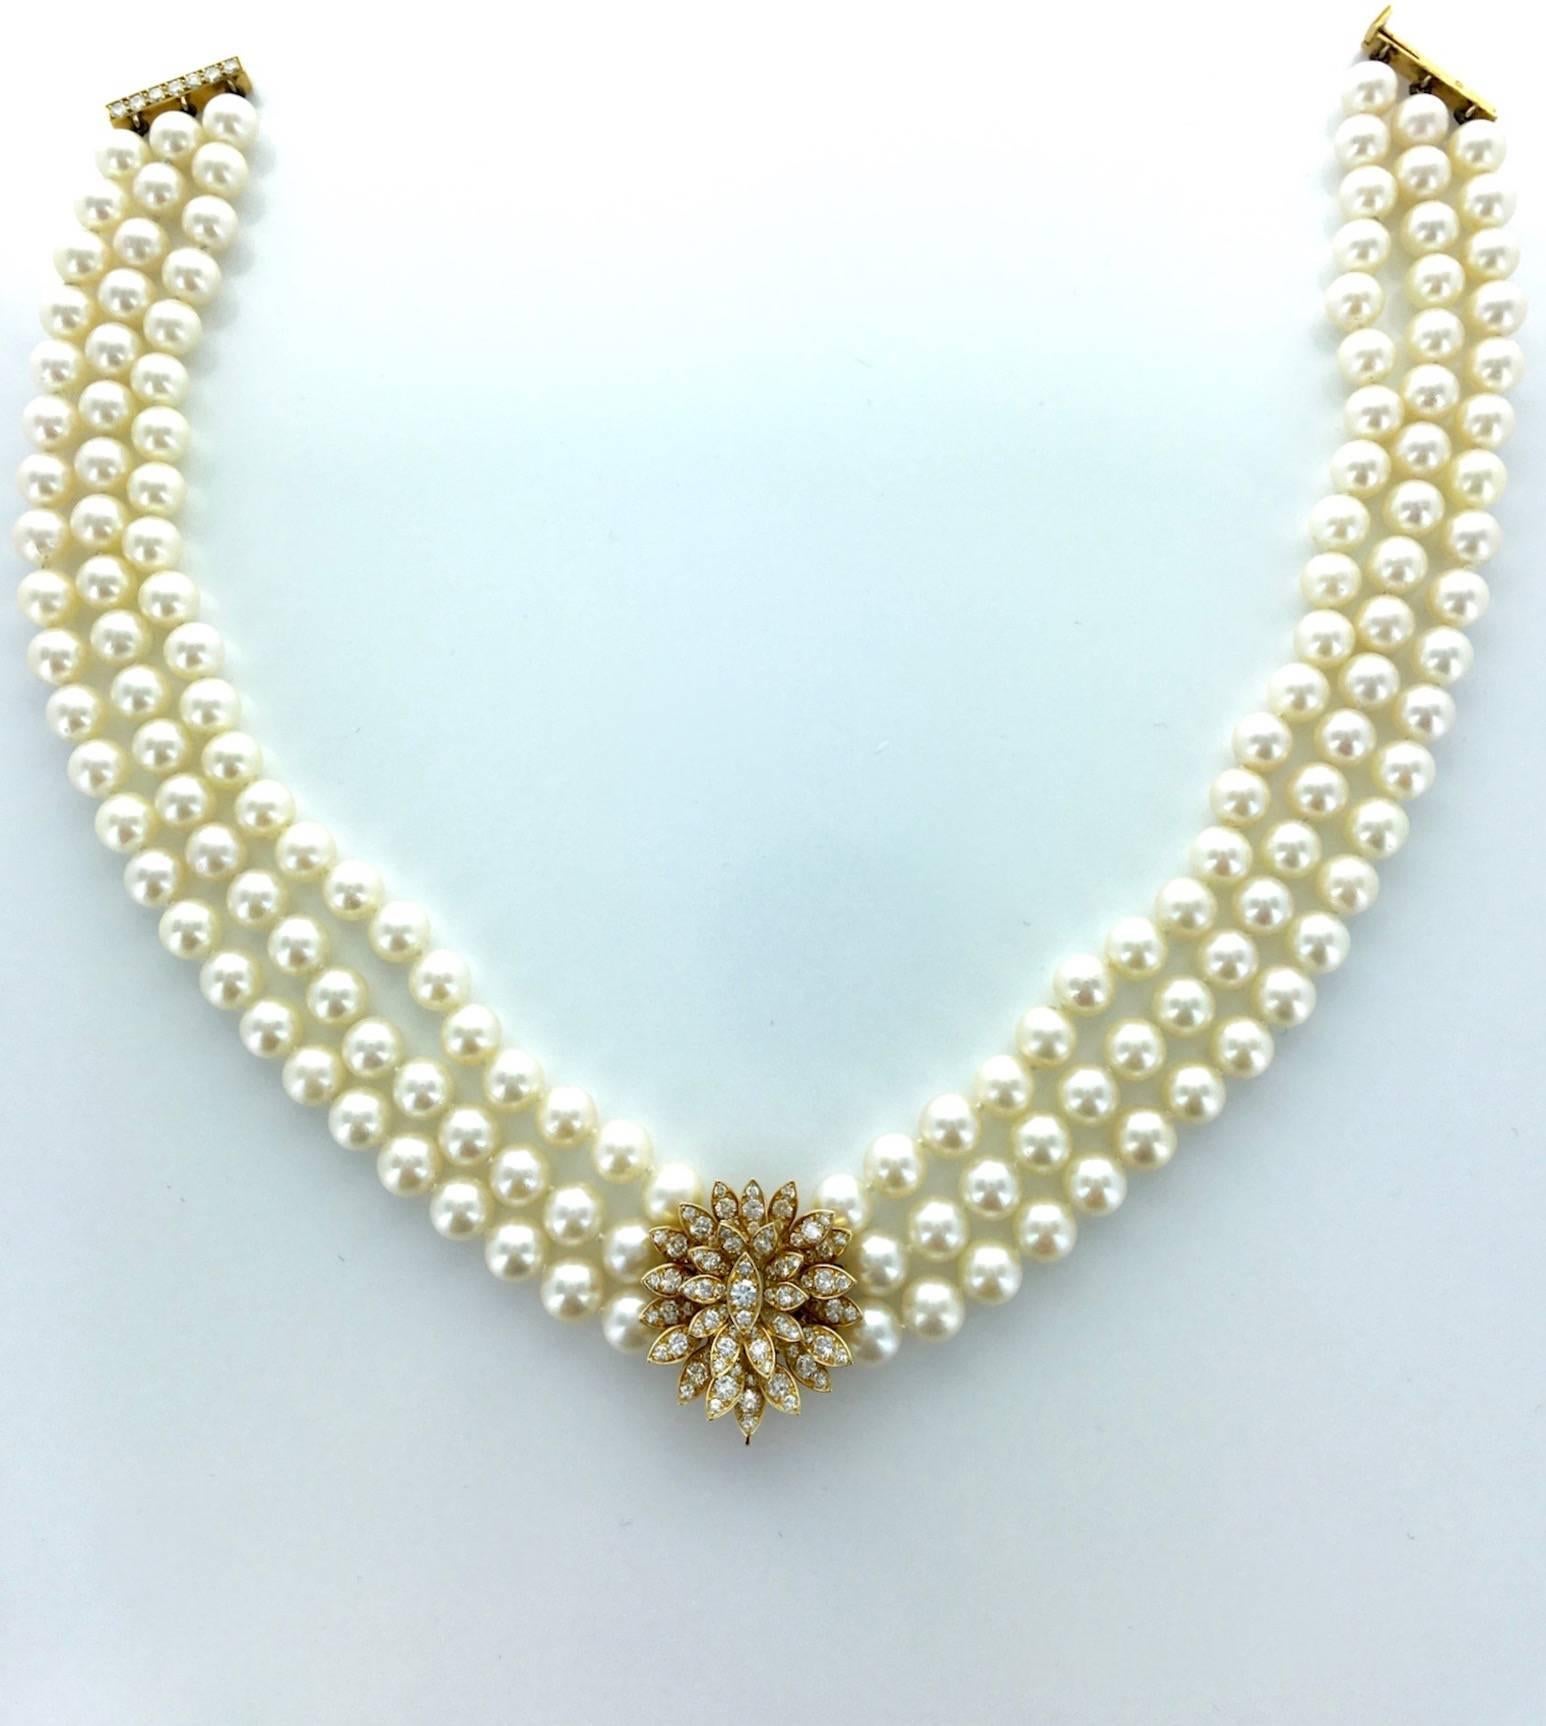 A Must-Have! (again), this necklace in Cultured Pearl is centered by a yellow gold 750 18k Flower all set by Diamond. The clasp in yellow gold and diamond.
Circa 1990.
French marks.
Signed Cartier, Numbered.

Gross weight: 83.94 grams.